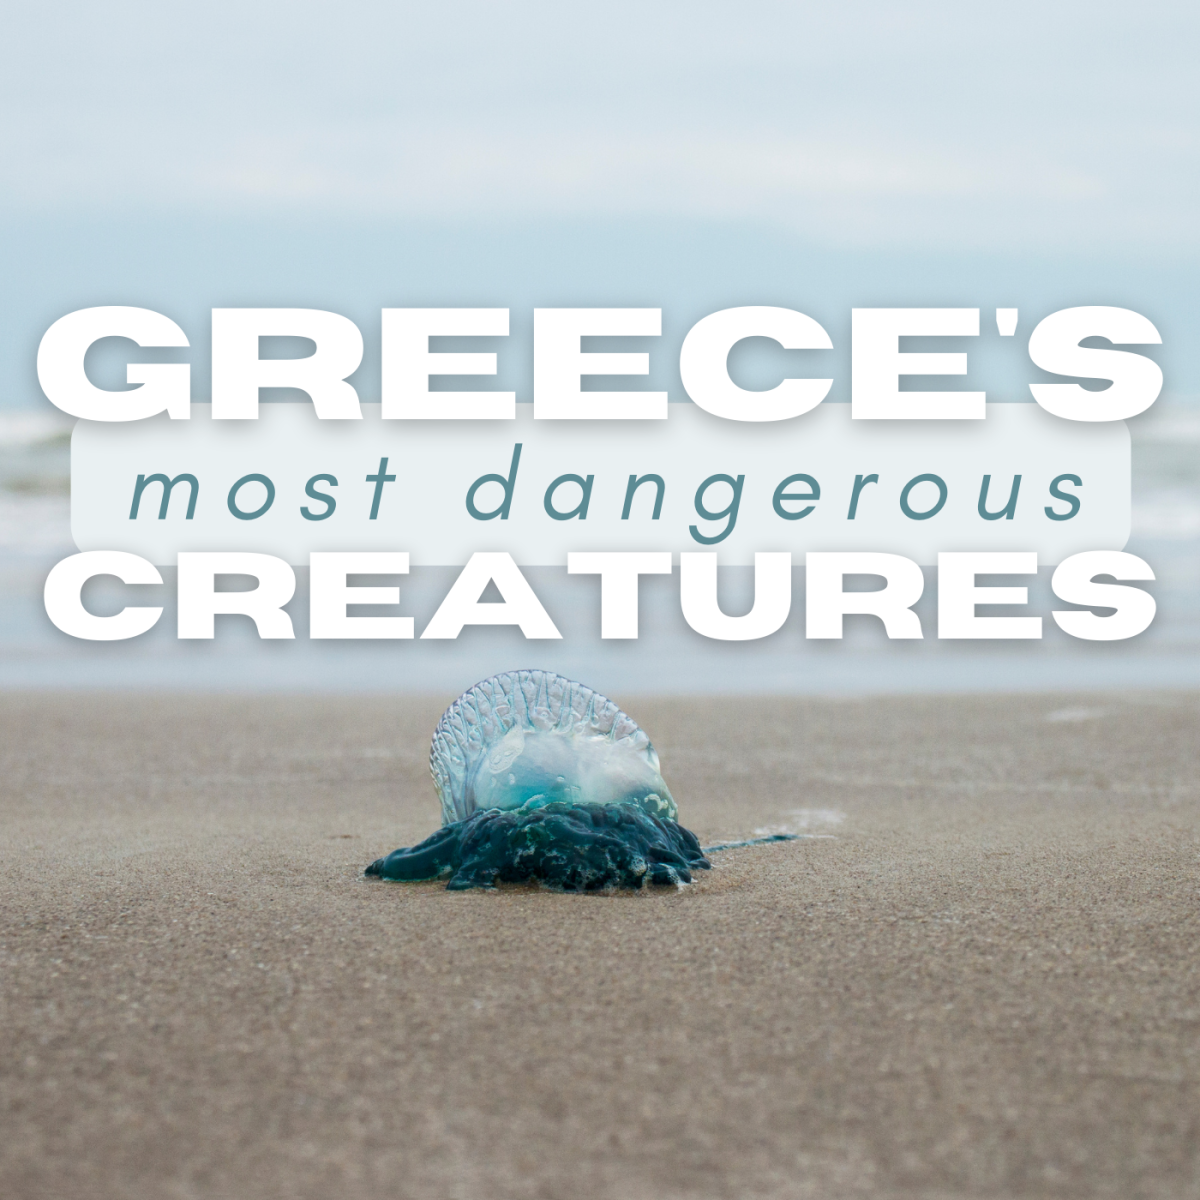 7 of Greece's Deadliest Animals: Insects, Snakes, and More